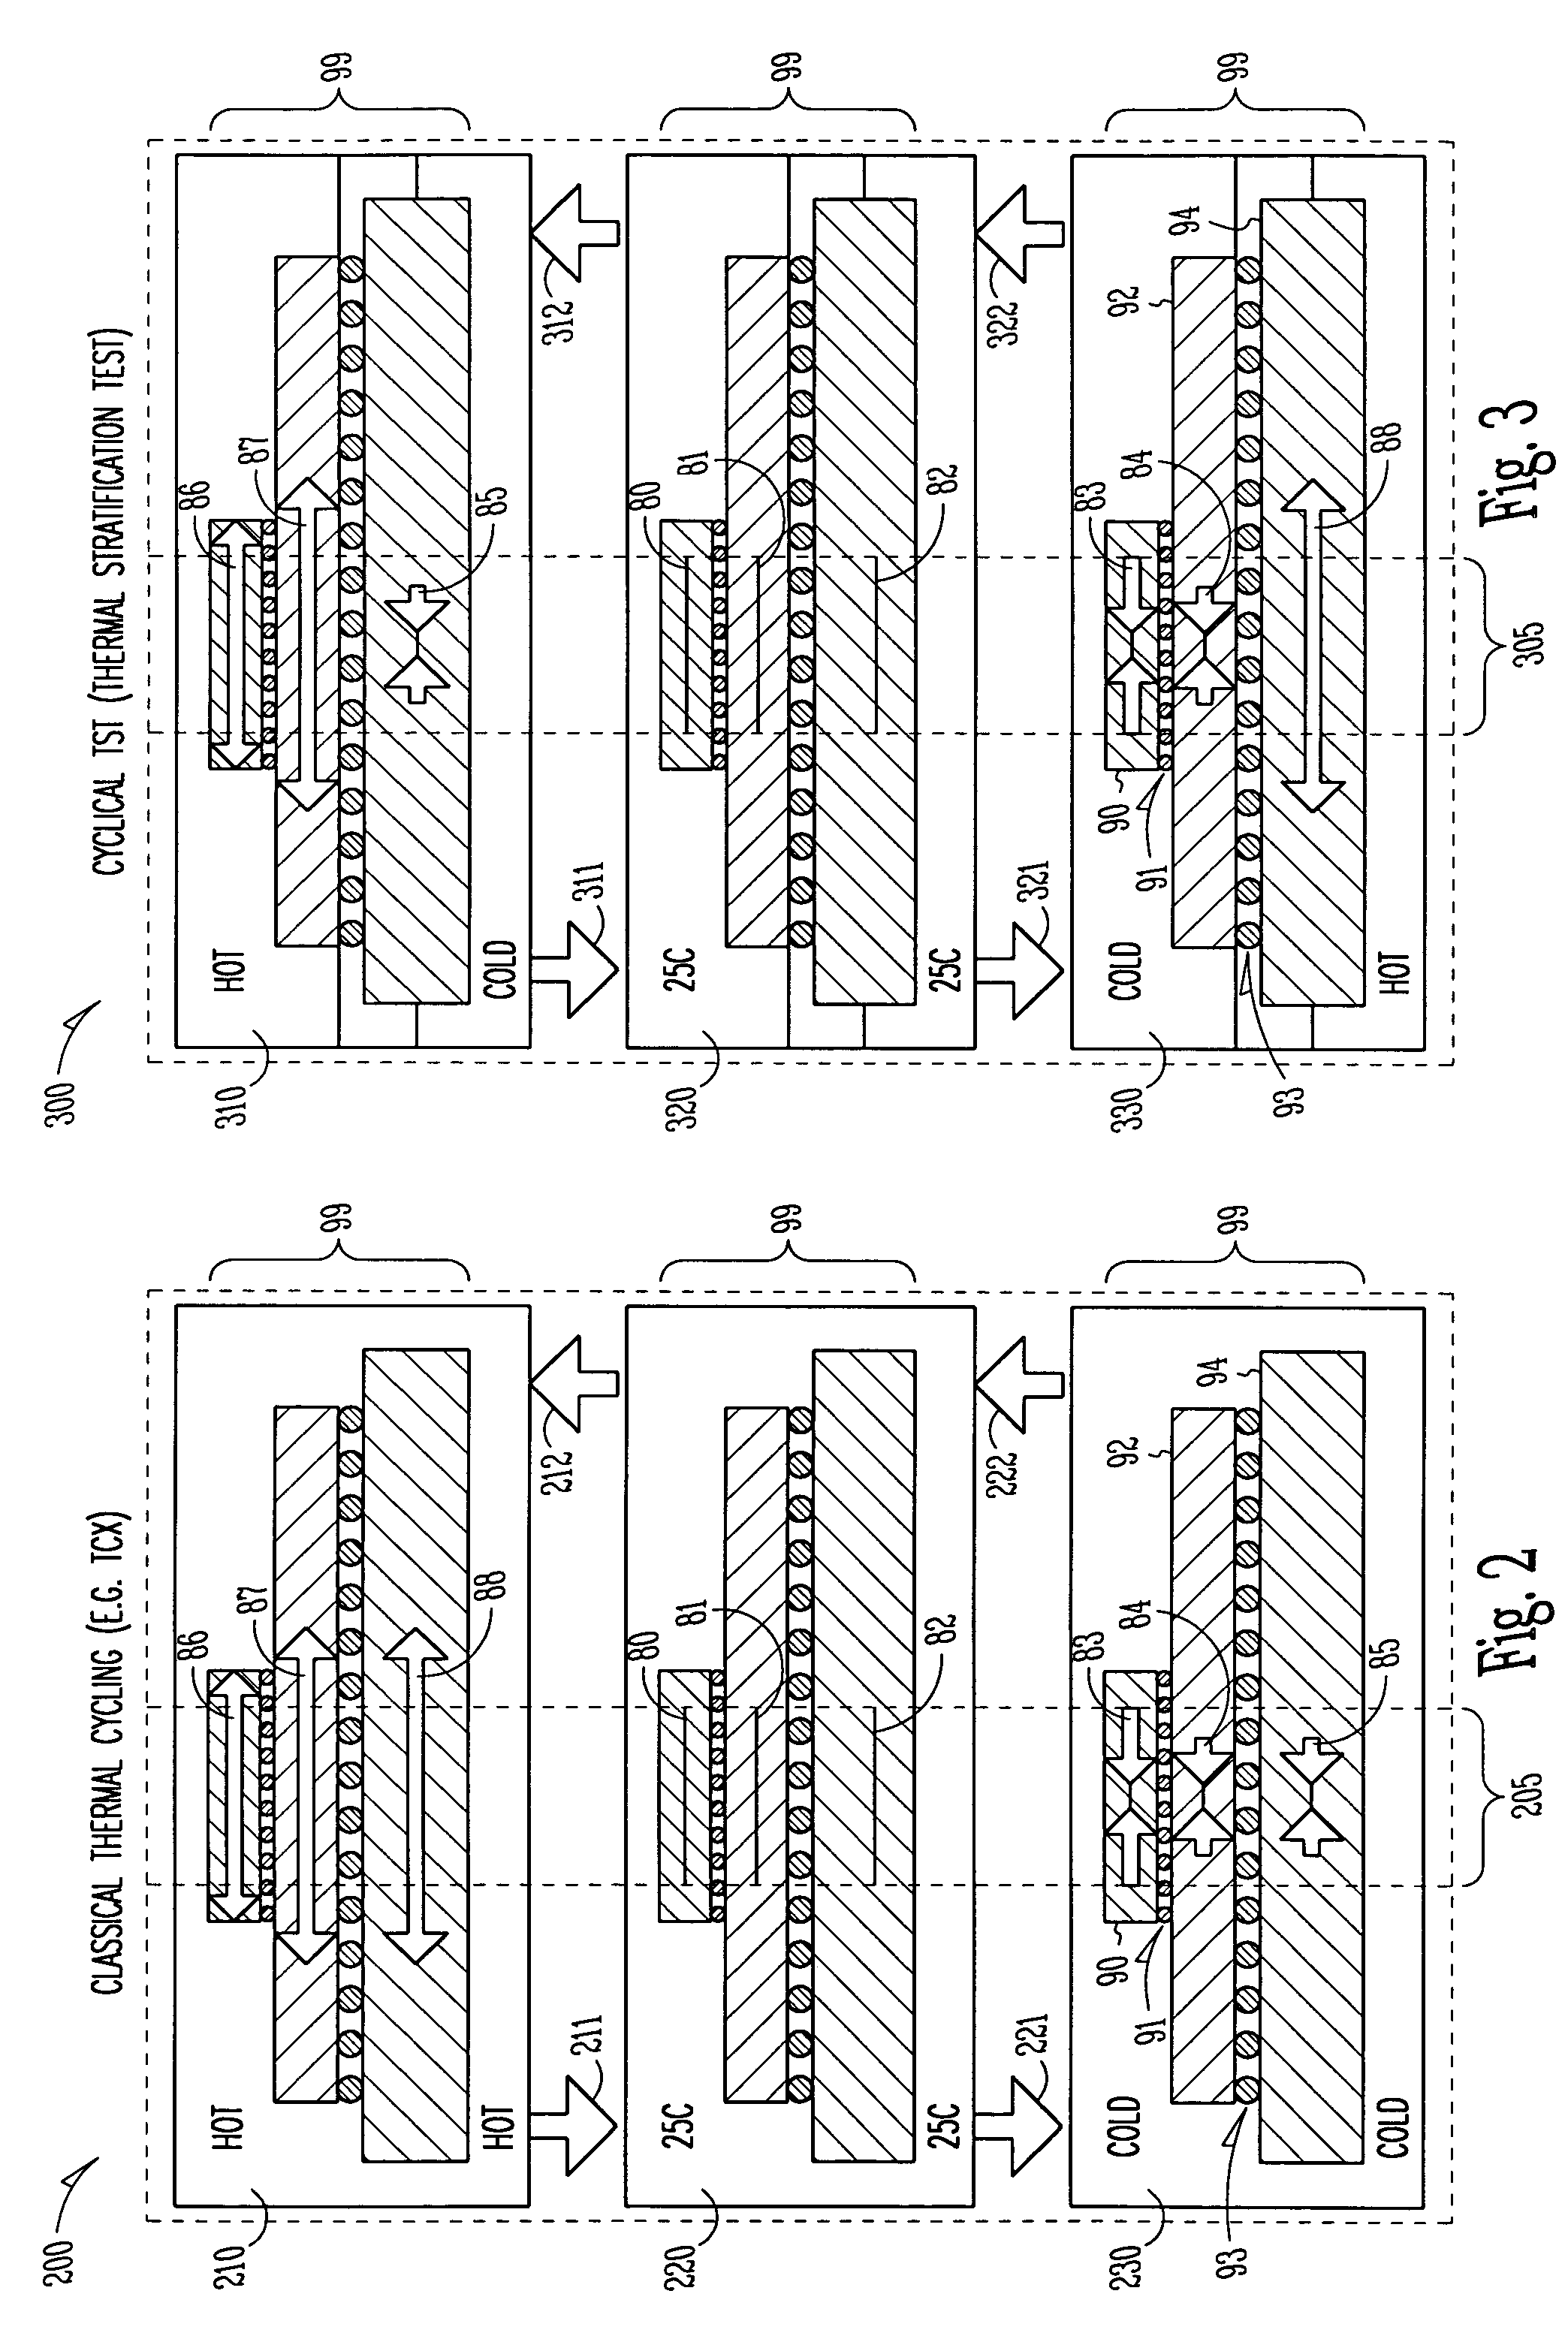 Thermal stratification test apparatus and method providing cyclical and steady-state stratified environments